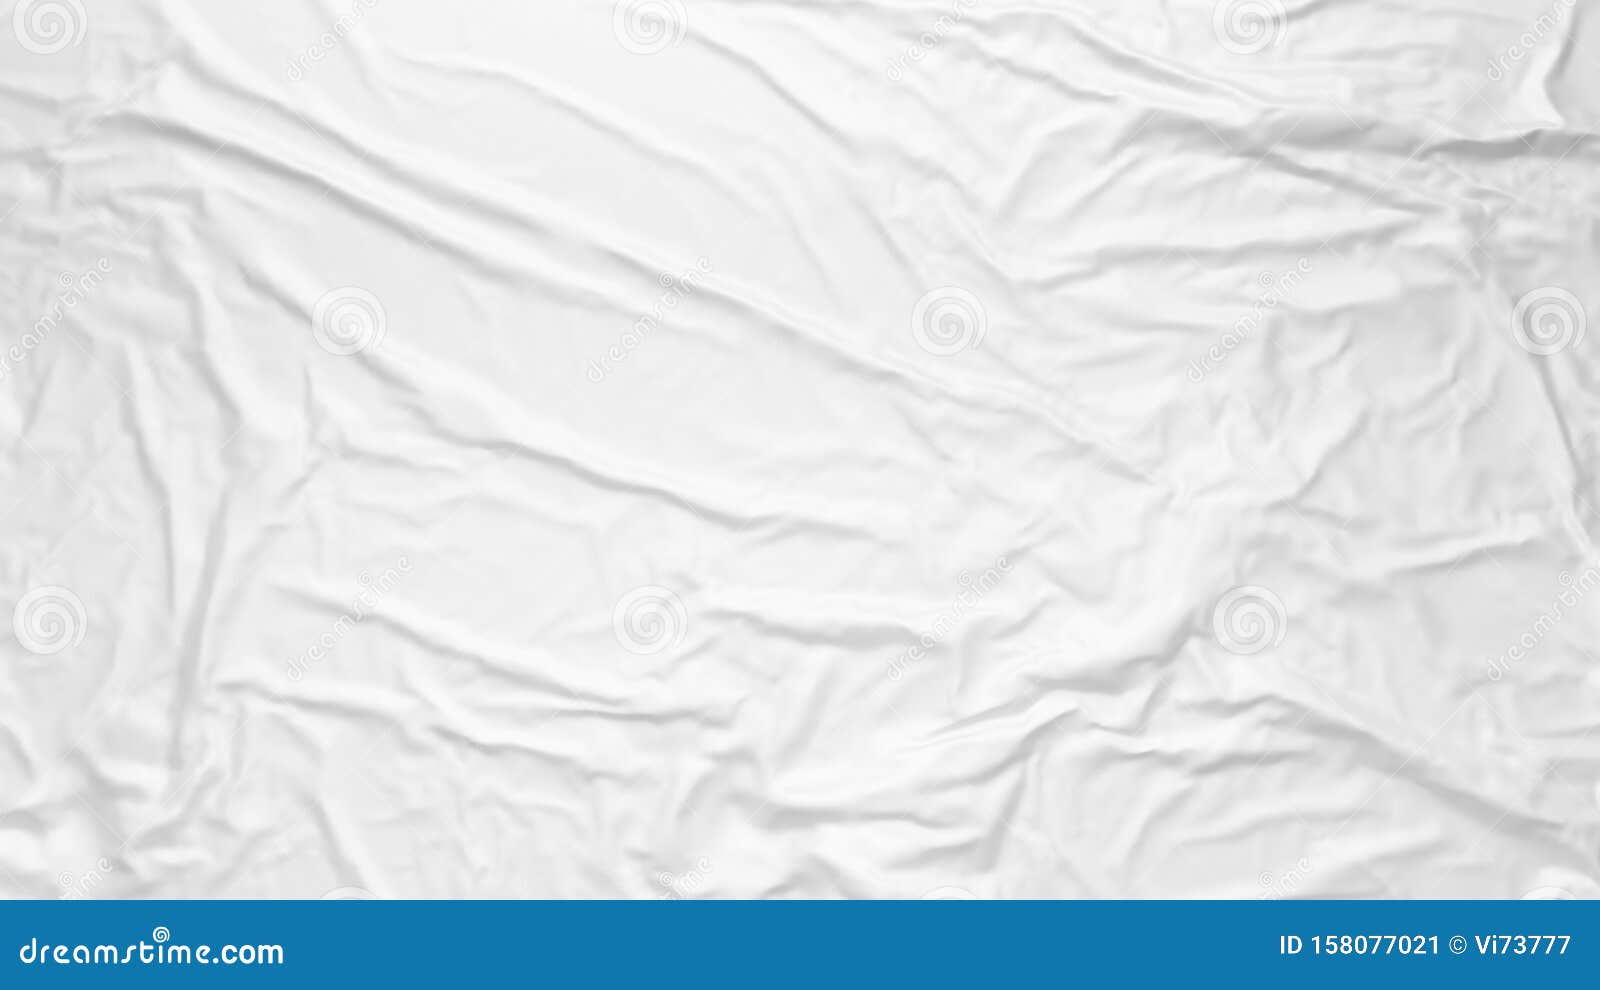 Download White Wrinkled Fabric Texture. Paste Poster Template ...